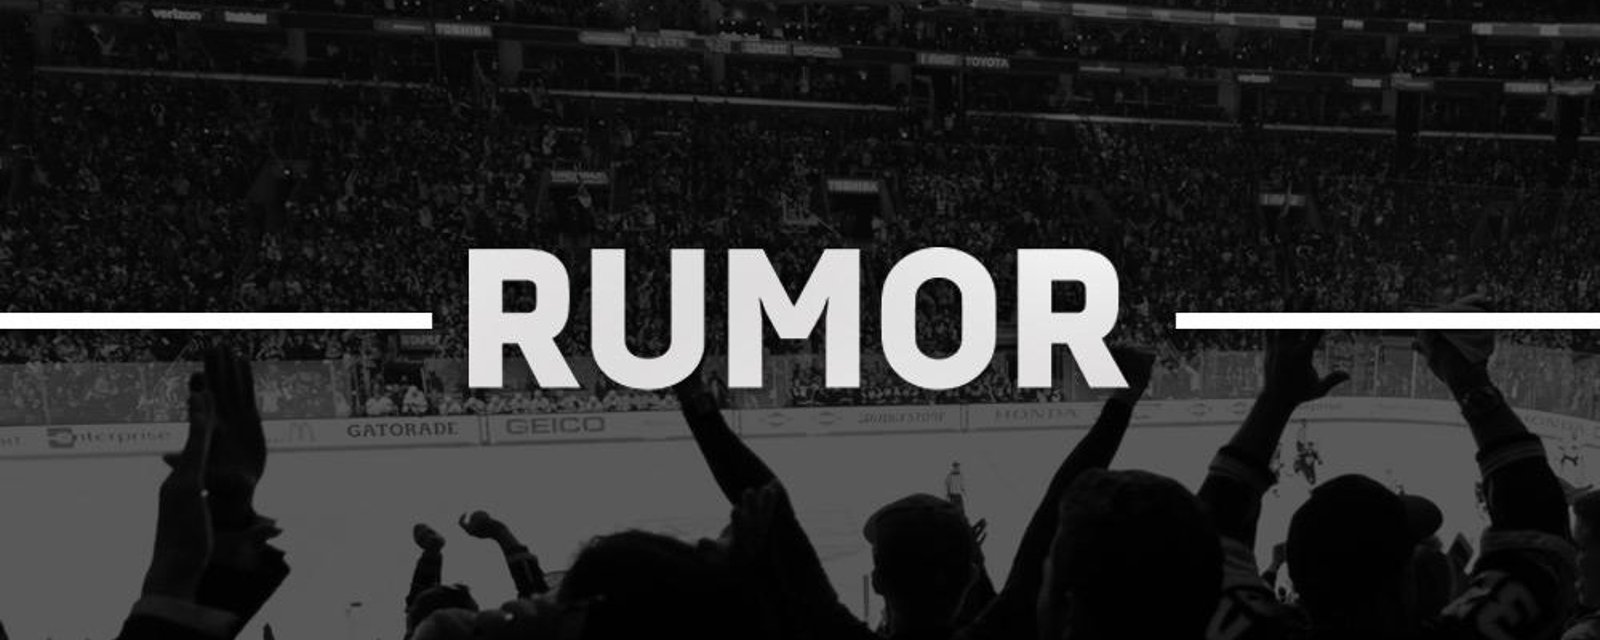 Rumor: Player heavily involved in trade talks absent from practice. 